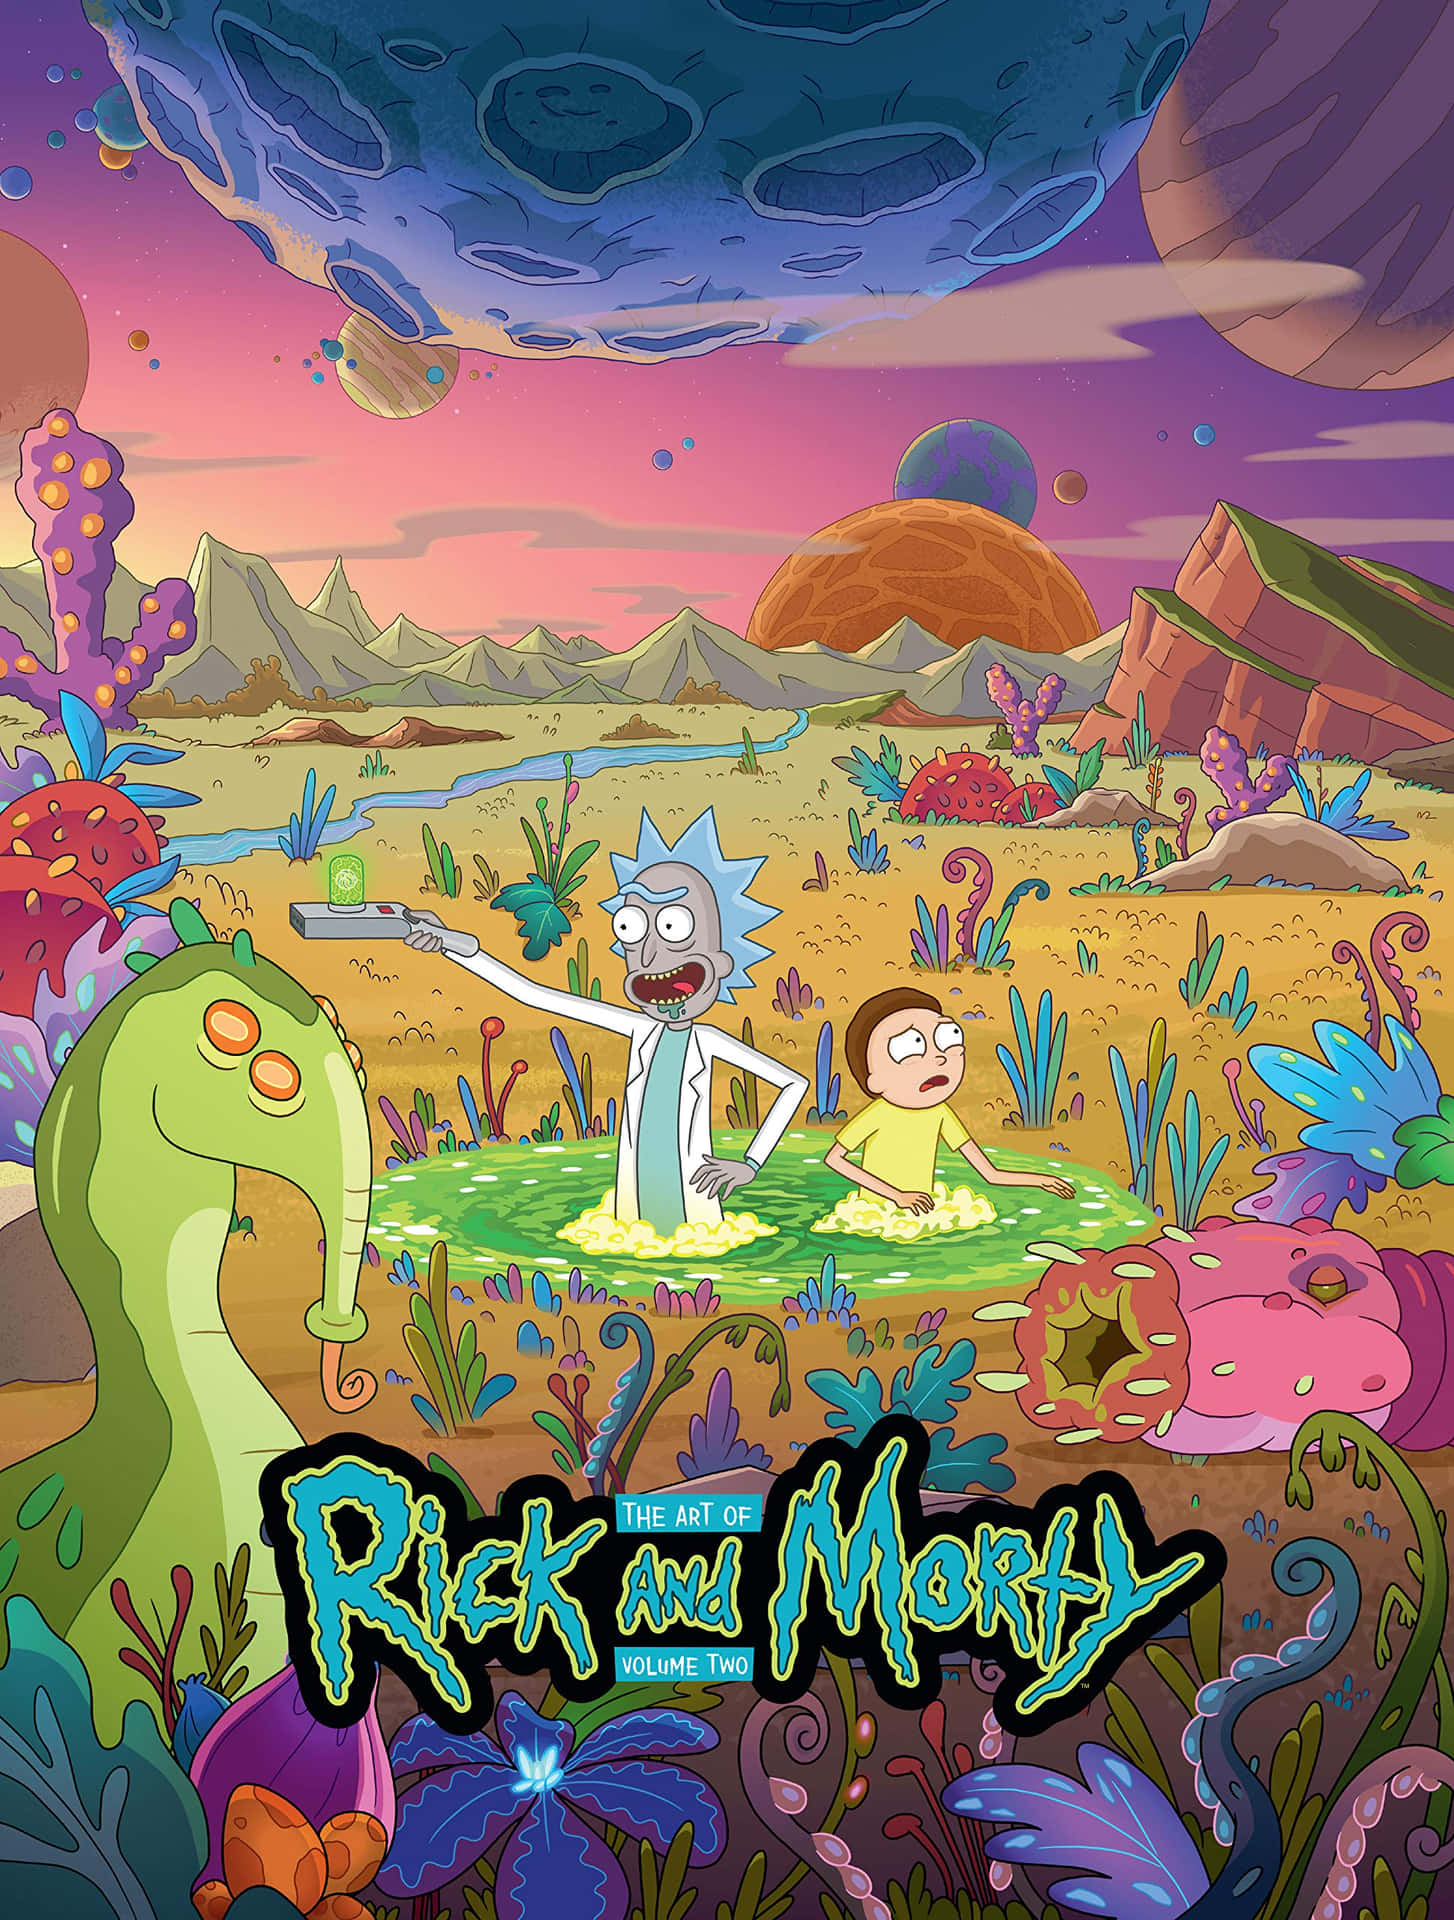 The Best of Interdimensional Travel—Rick and Morty